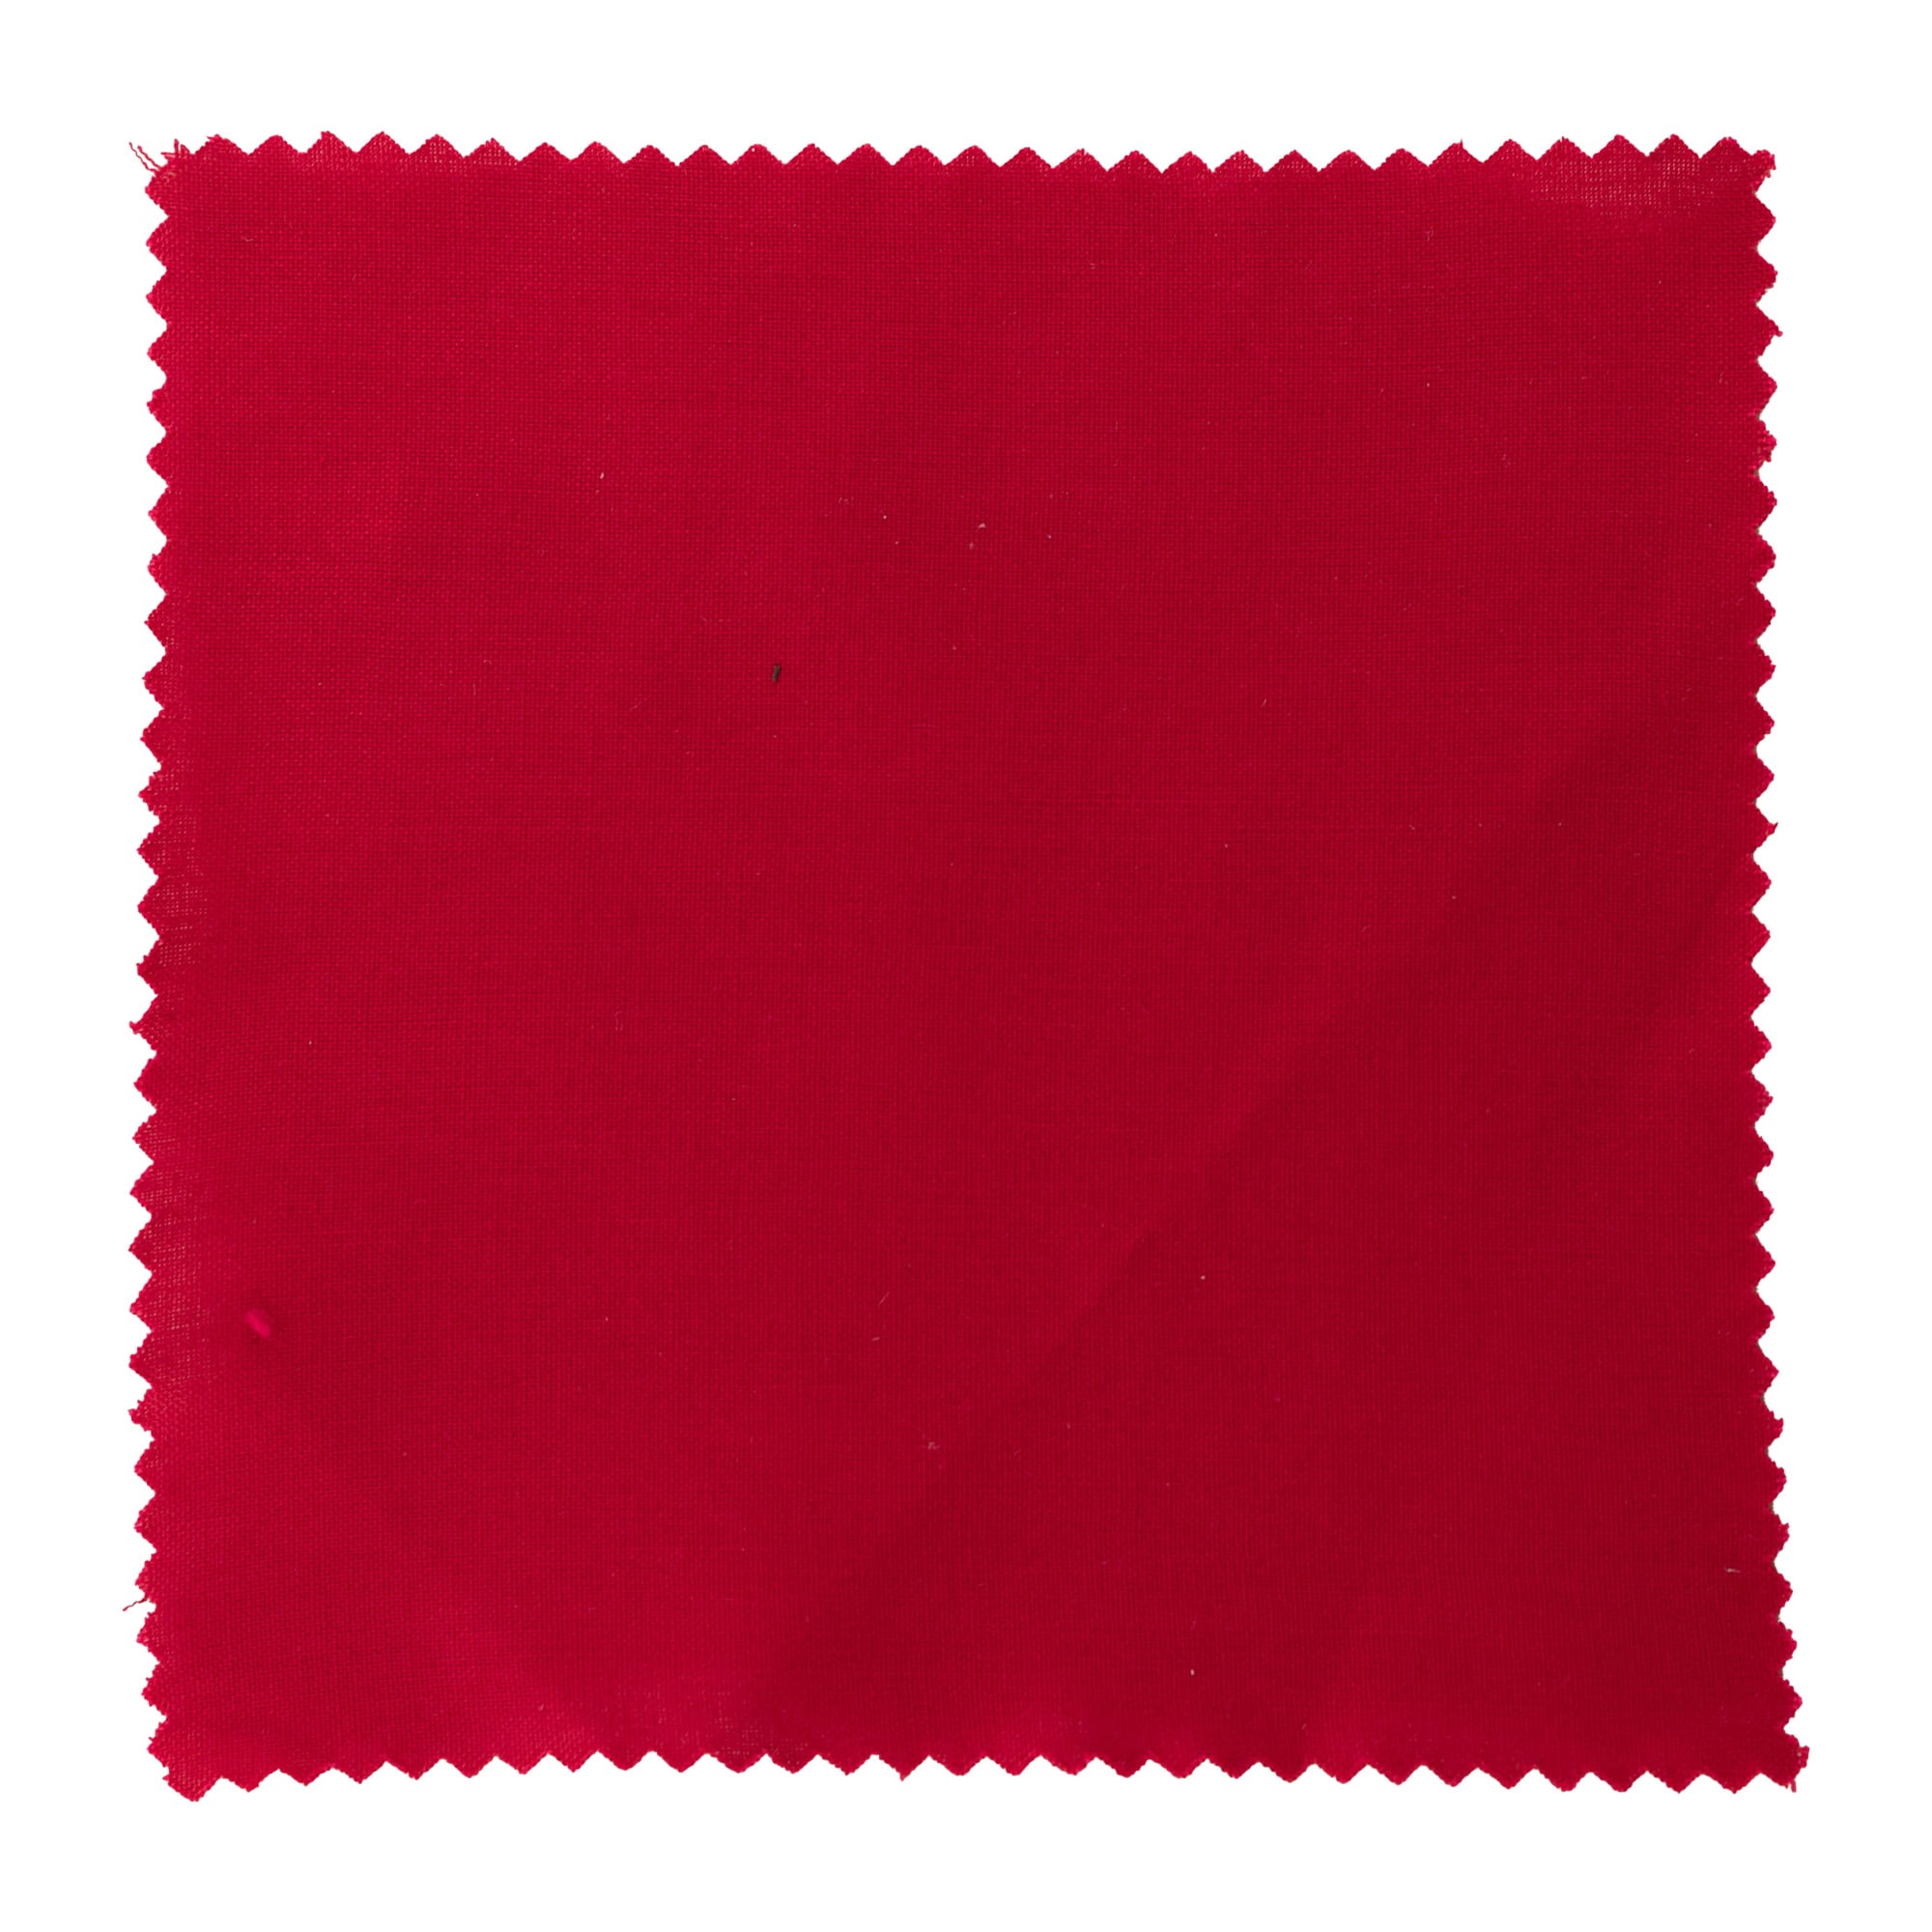 Napperon 15x15, carré, tissu, rouge, bouchage: TO58-TO82